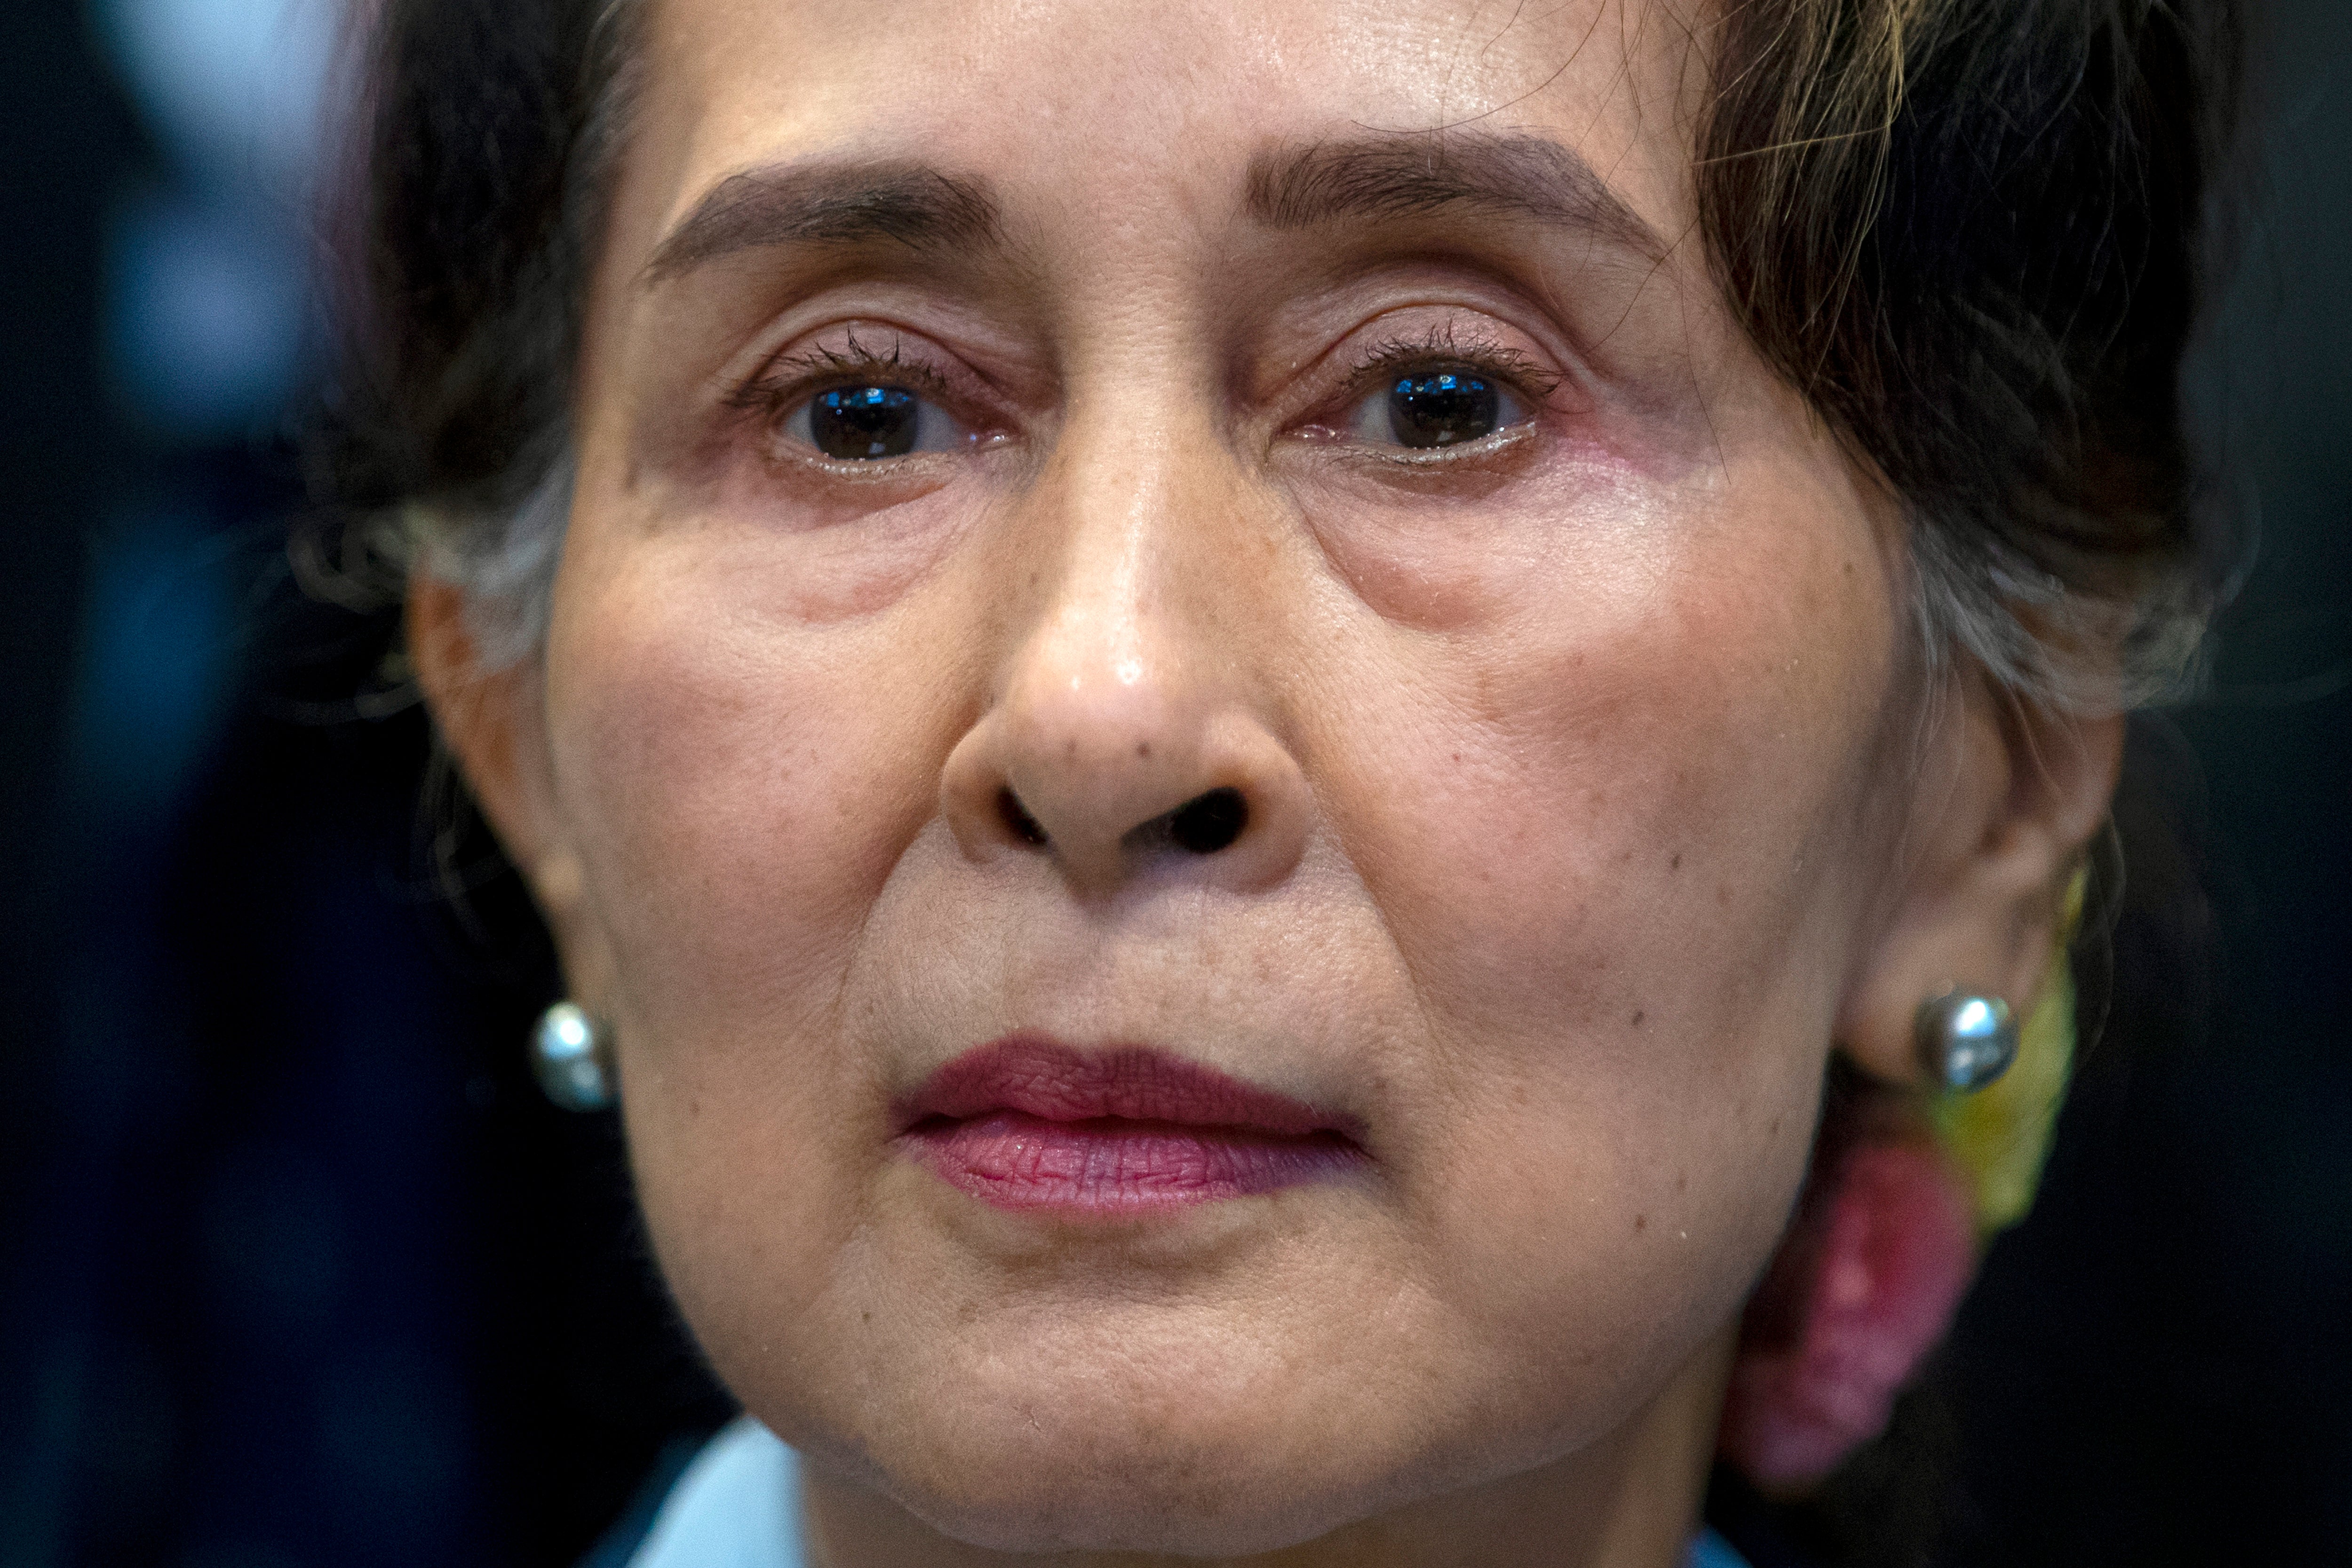 Aung San Suu Kyi could face more than 100 years in prison on a dozen criminal charges